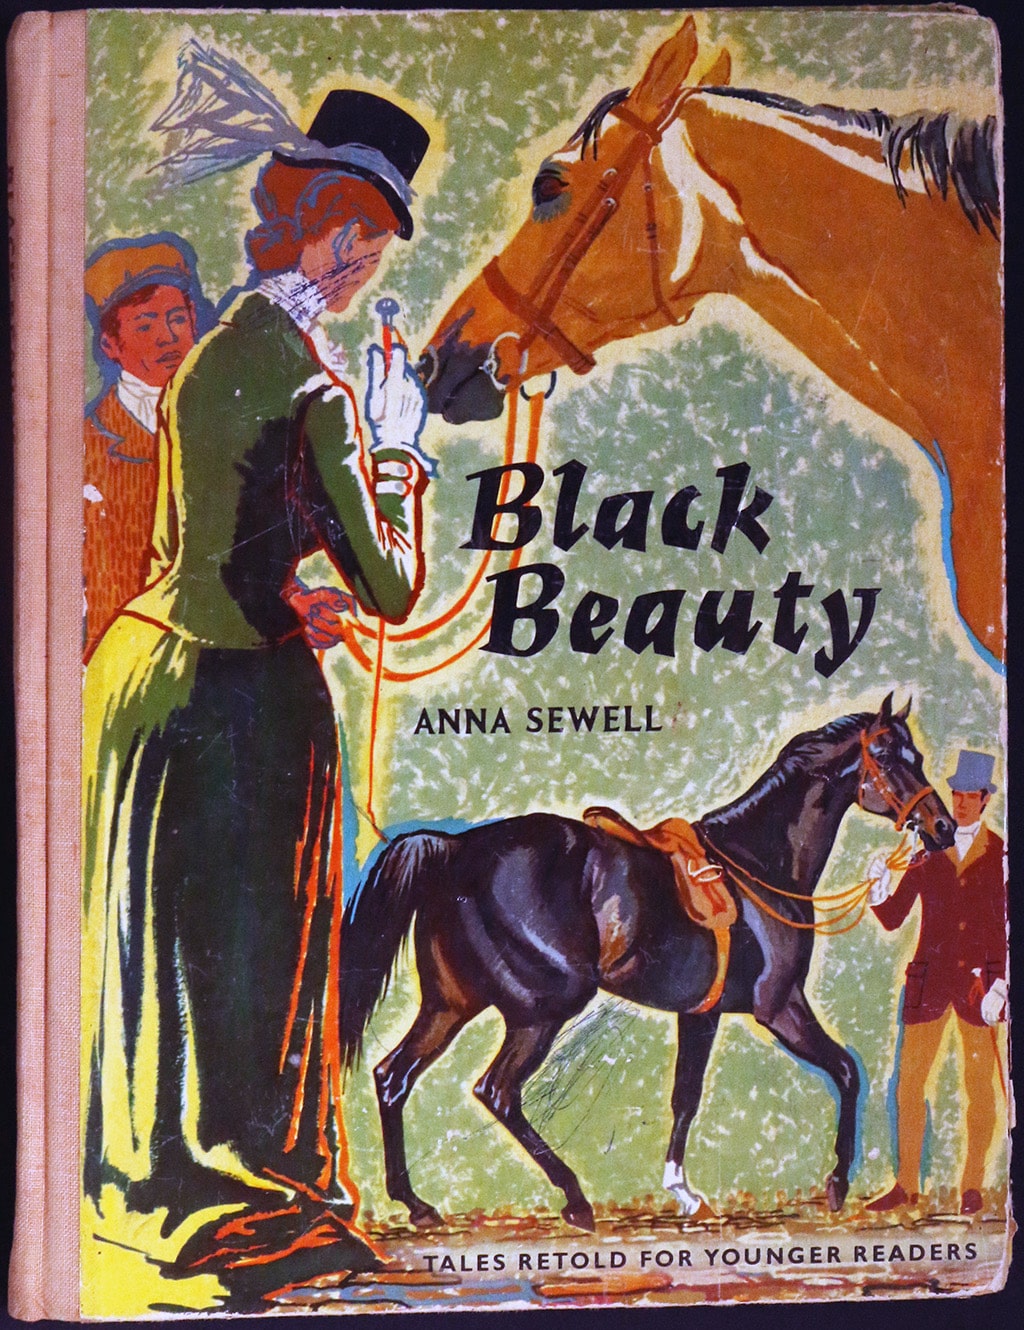 The front cover of Black Beauty by Anna Sewell.